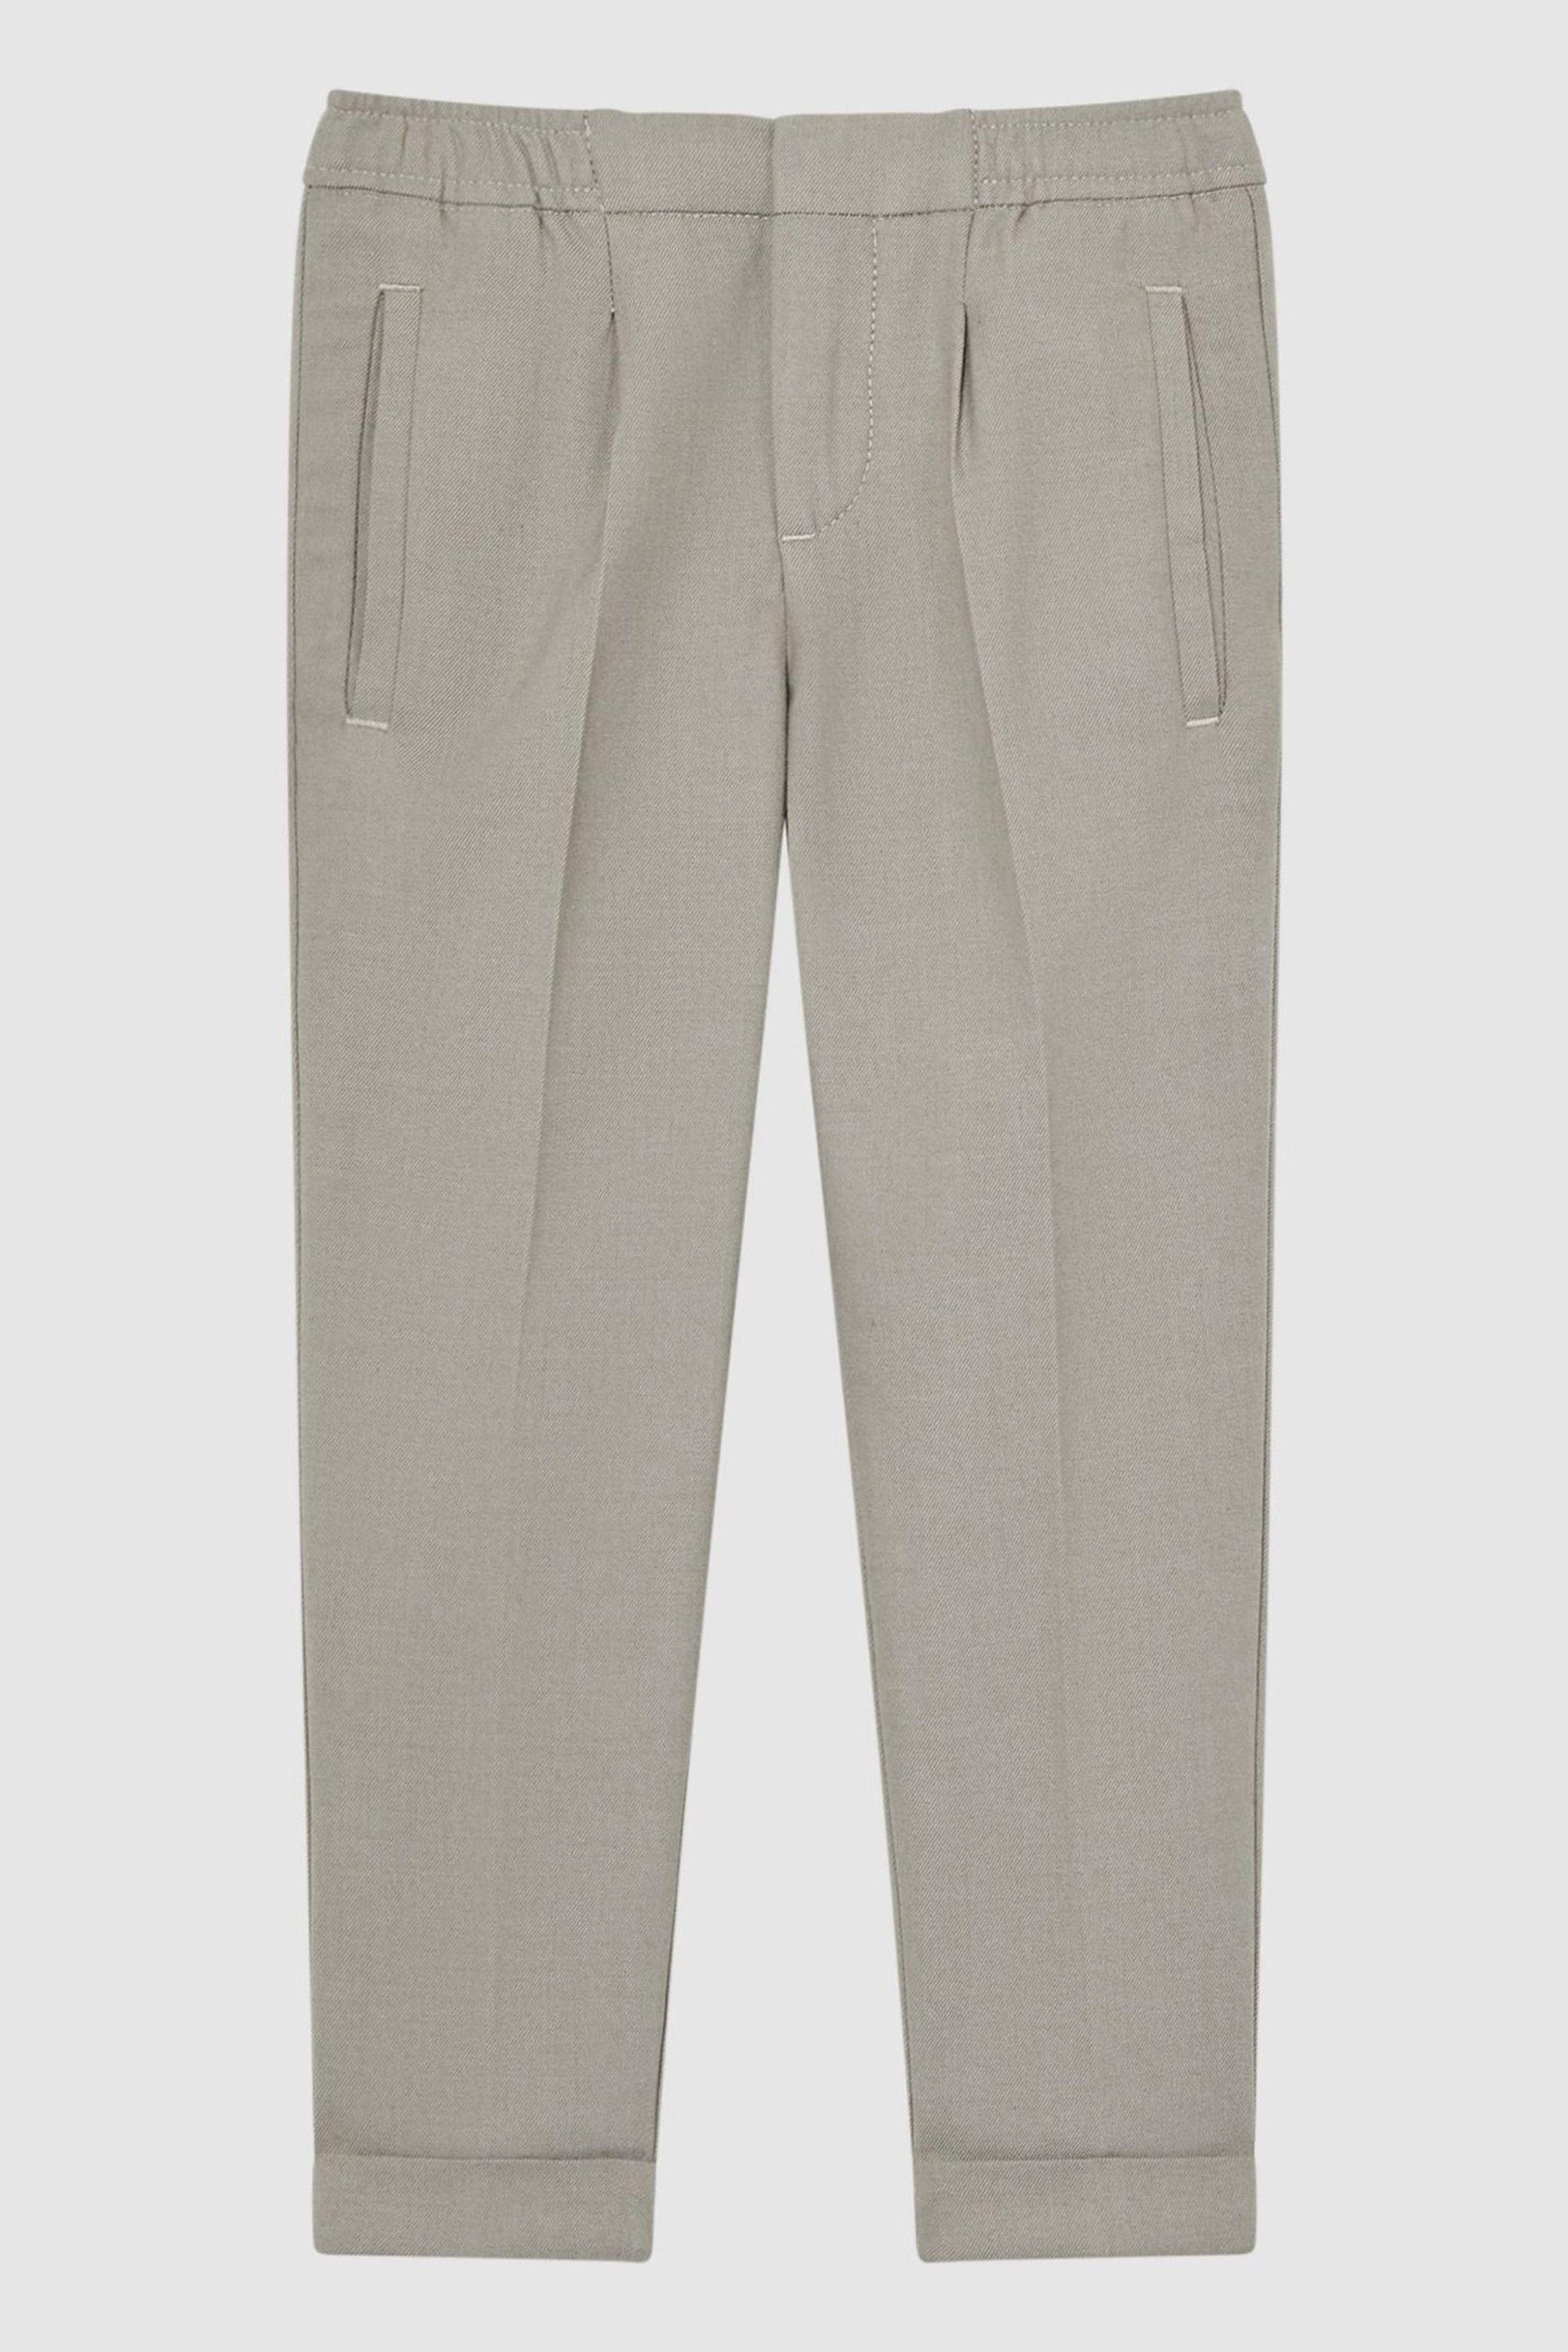 Reiss Taupe Brighton Senior Relaxed Elasticated Trousers with Turn-Ups - Image 2 of 7